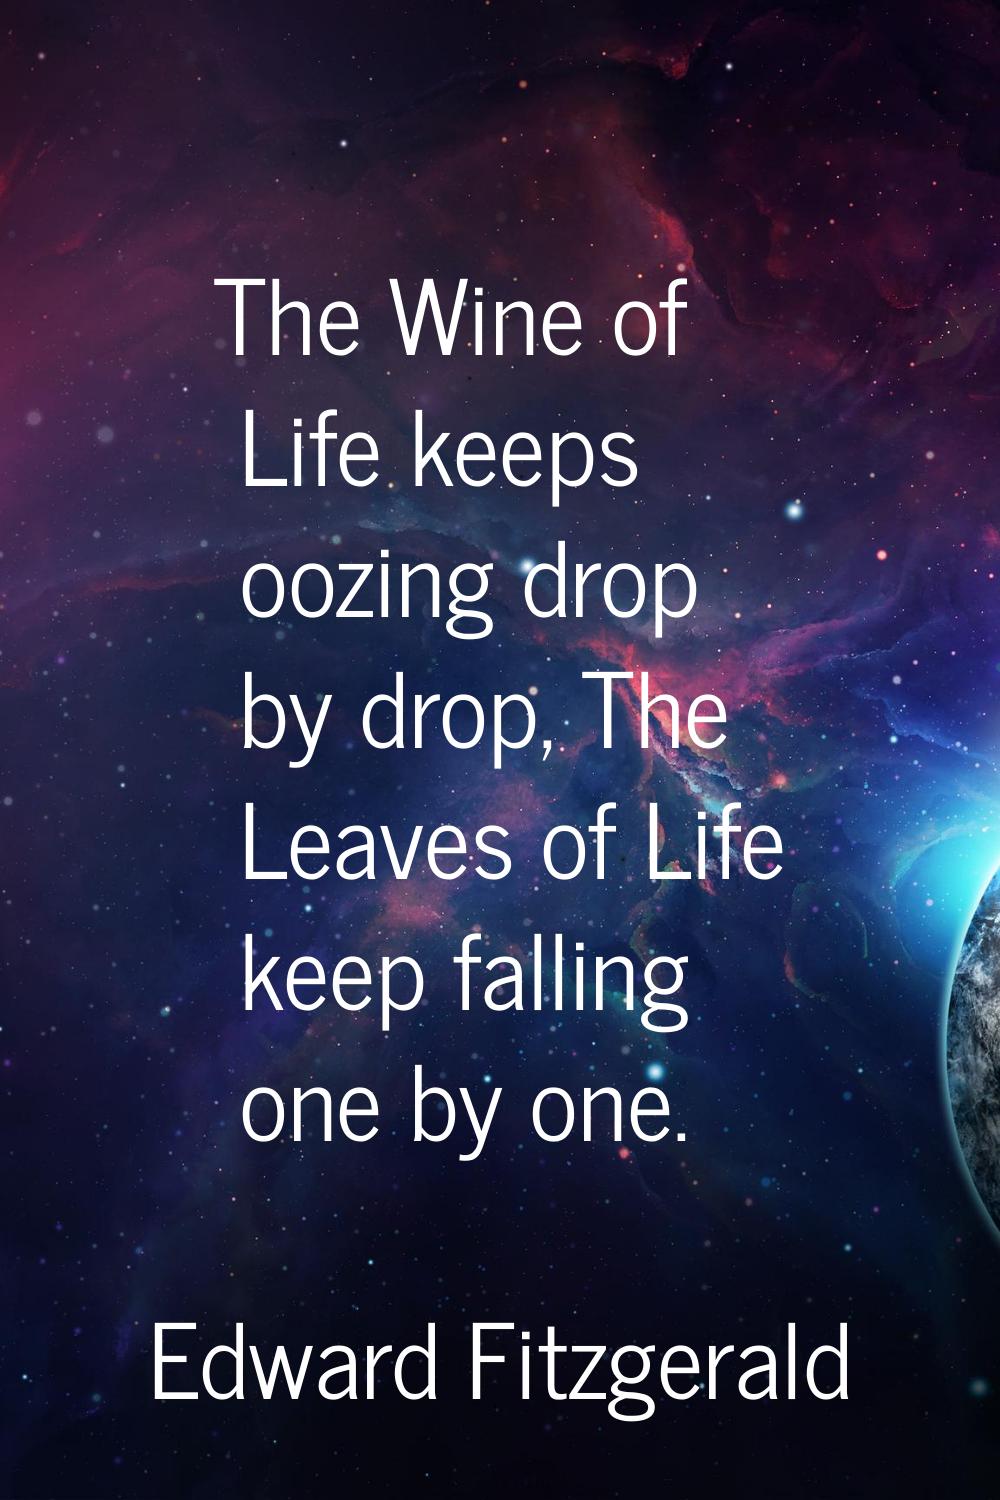 The Wine of Life keeps oozing drop by drop, The Leaves of Life keep falling one by one.